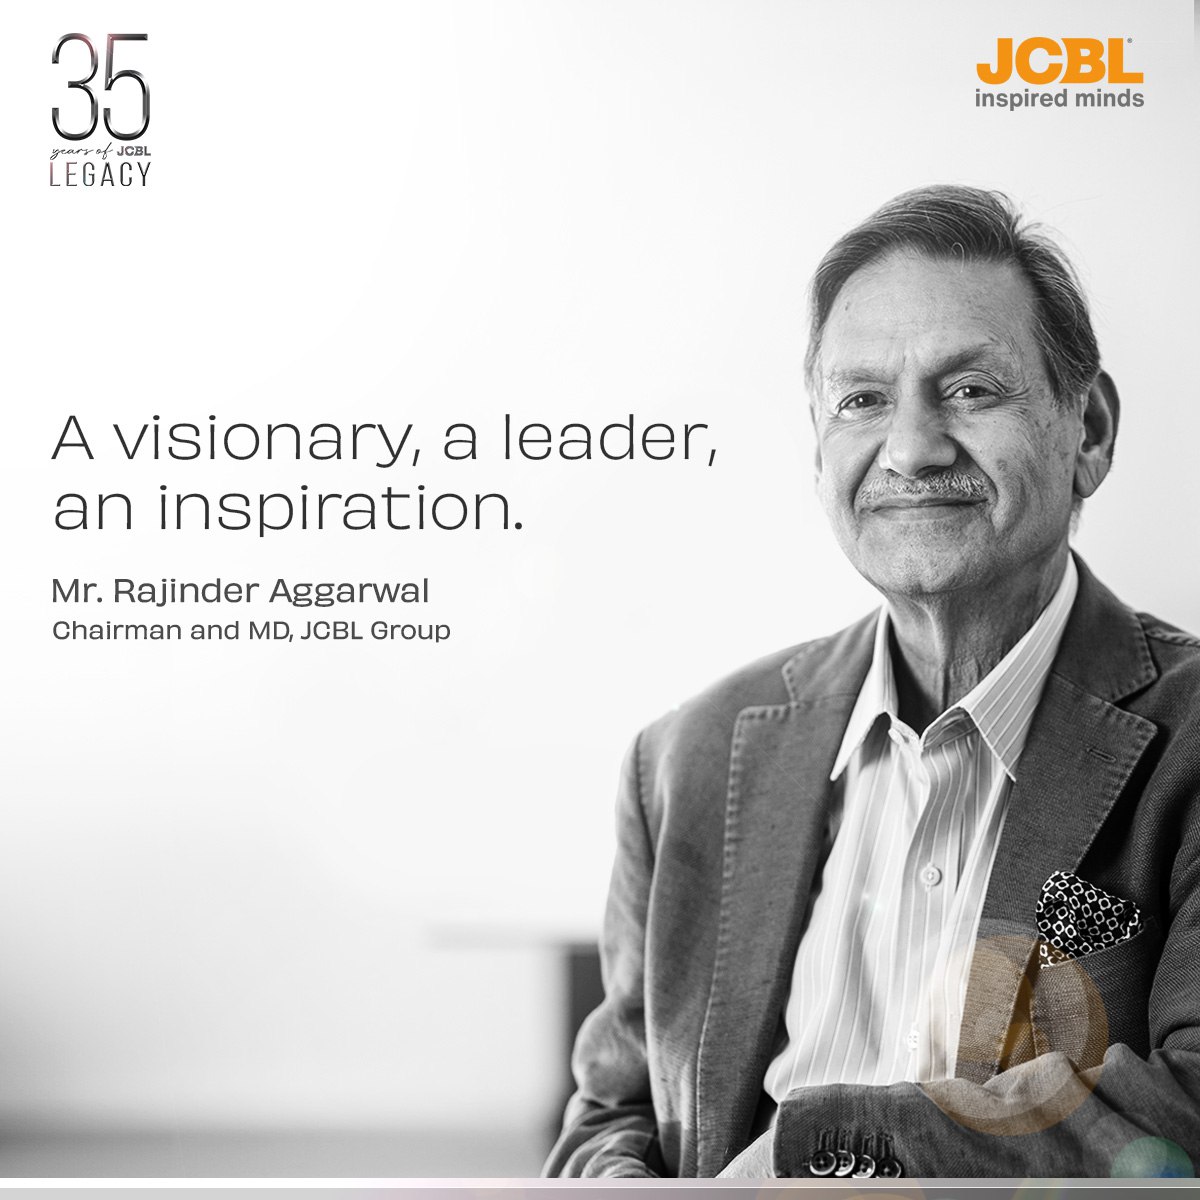 Celebrating a legacy of 35 years!

Join us as we celebrate the visionary leadership of Mr. Rajinder Aggarwal, Chairman and MD, JCBL Group whose legacy continues to inspire us every day.

#35YearsOfLegacy #35YearsStrong #JourneyOfIntegrity #InspiredMinds #JCBLGroup